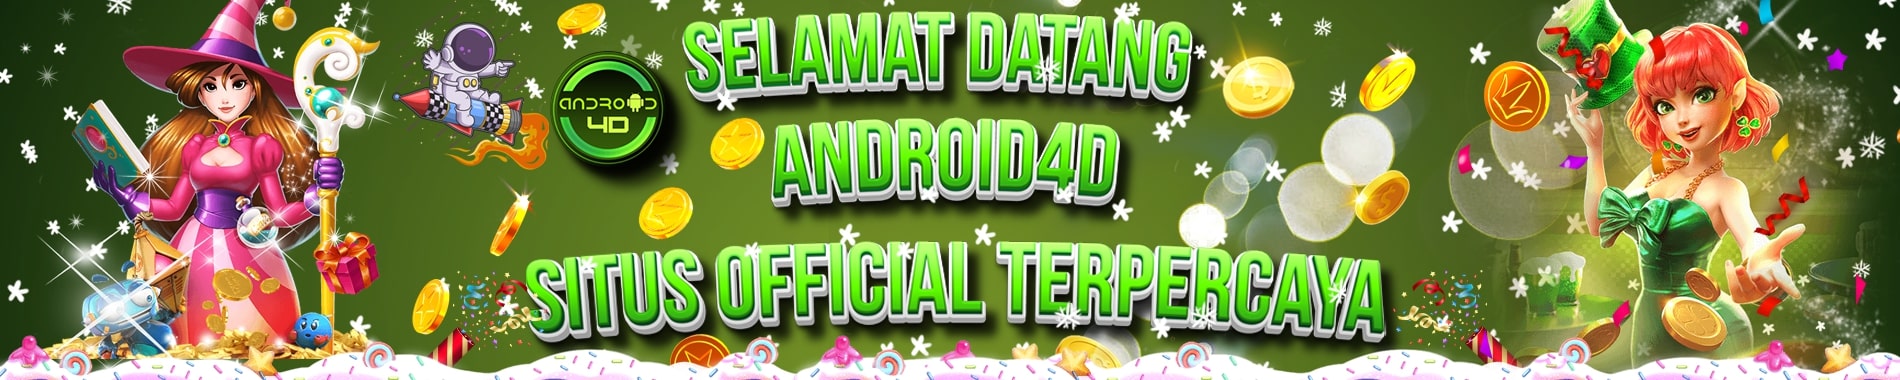 Android4d welcome